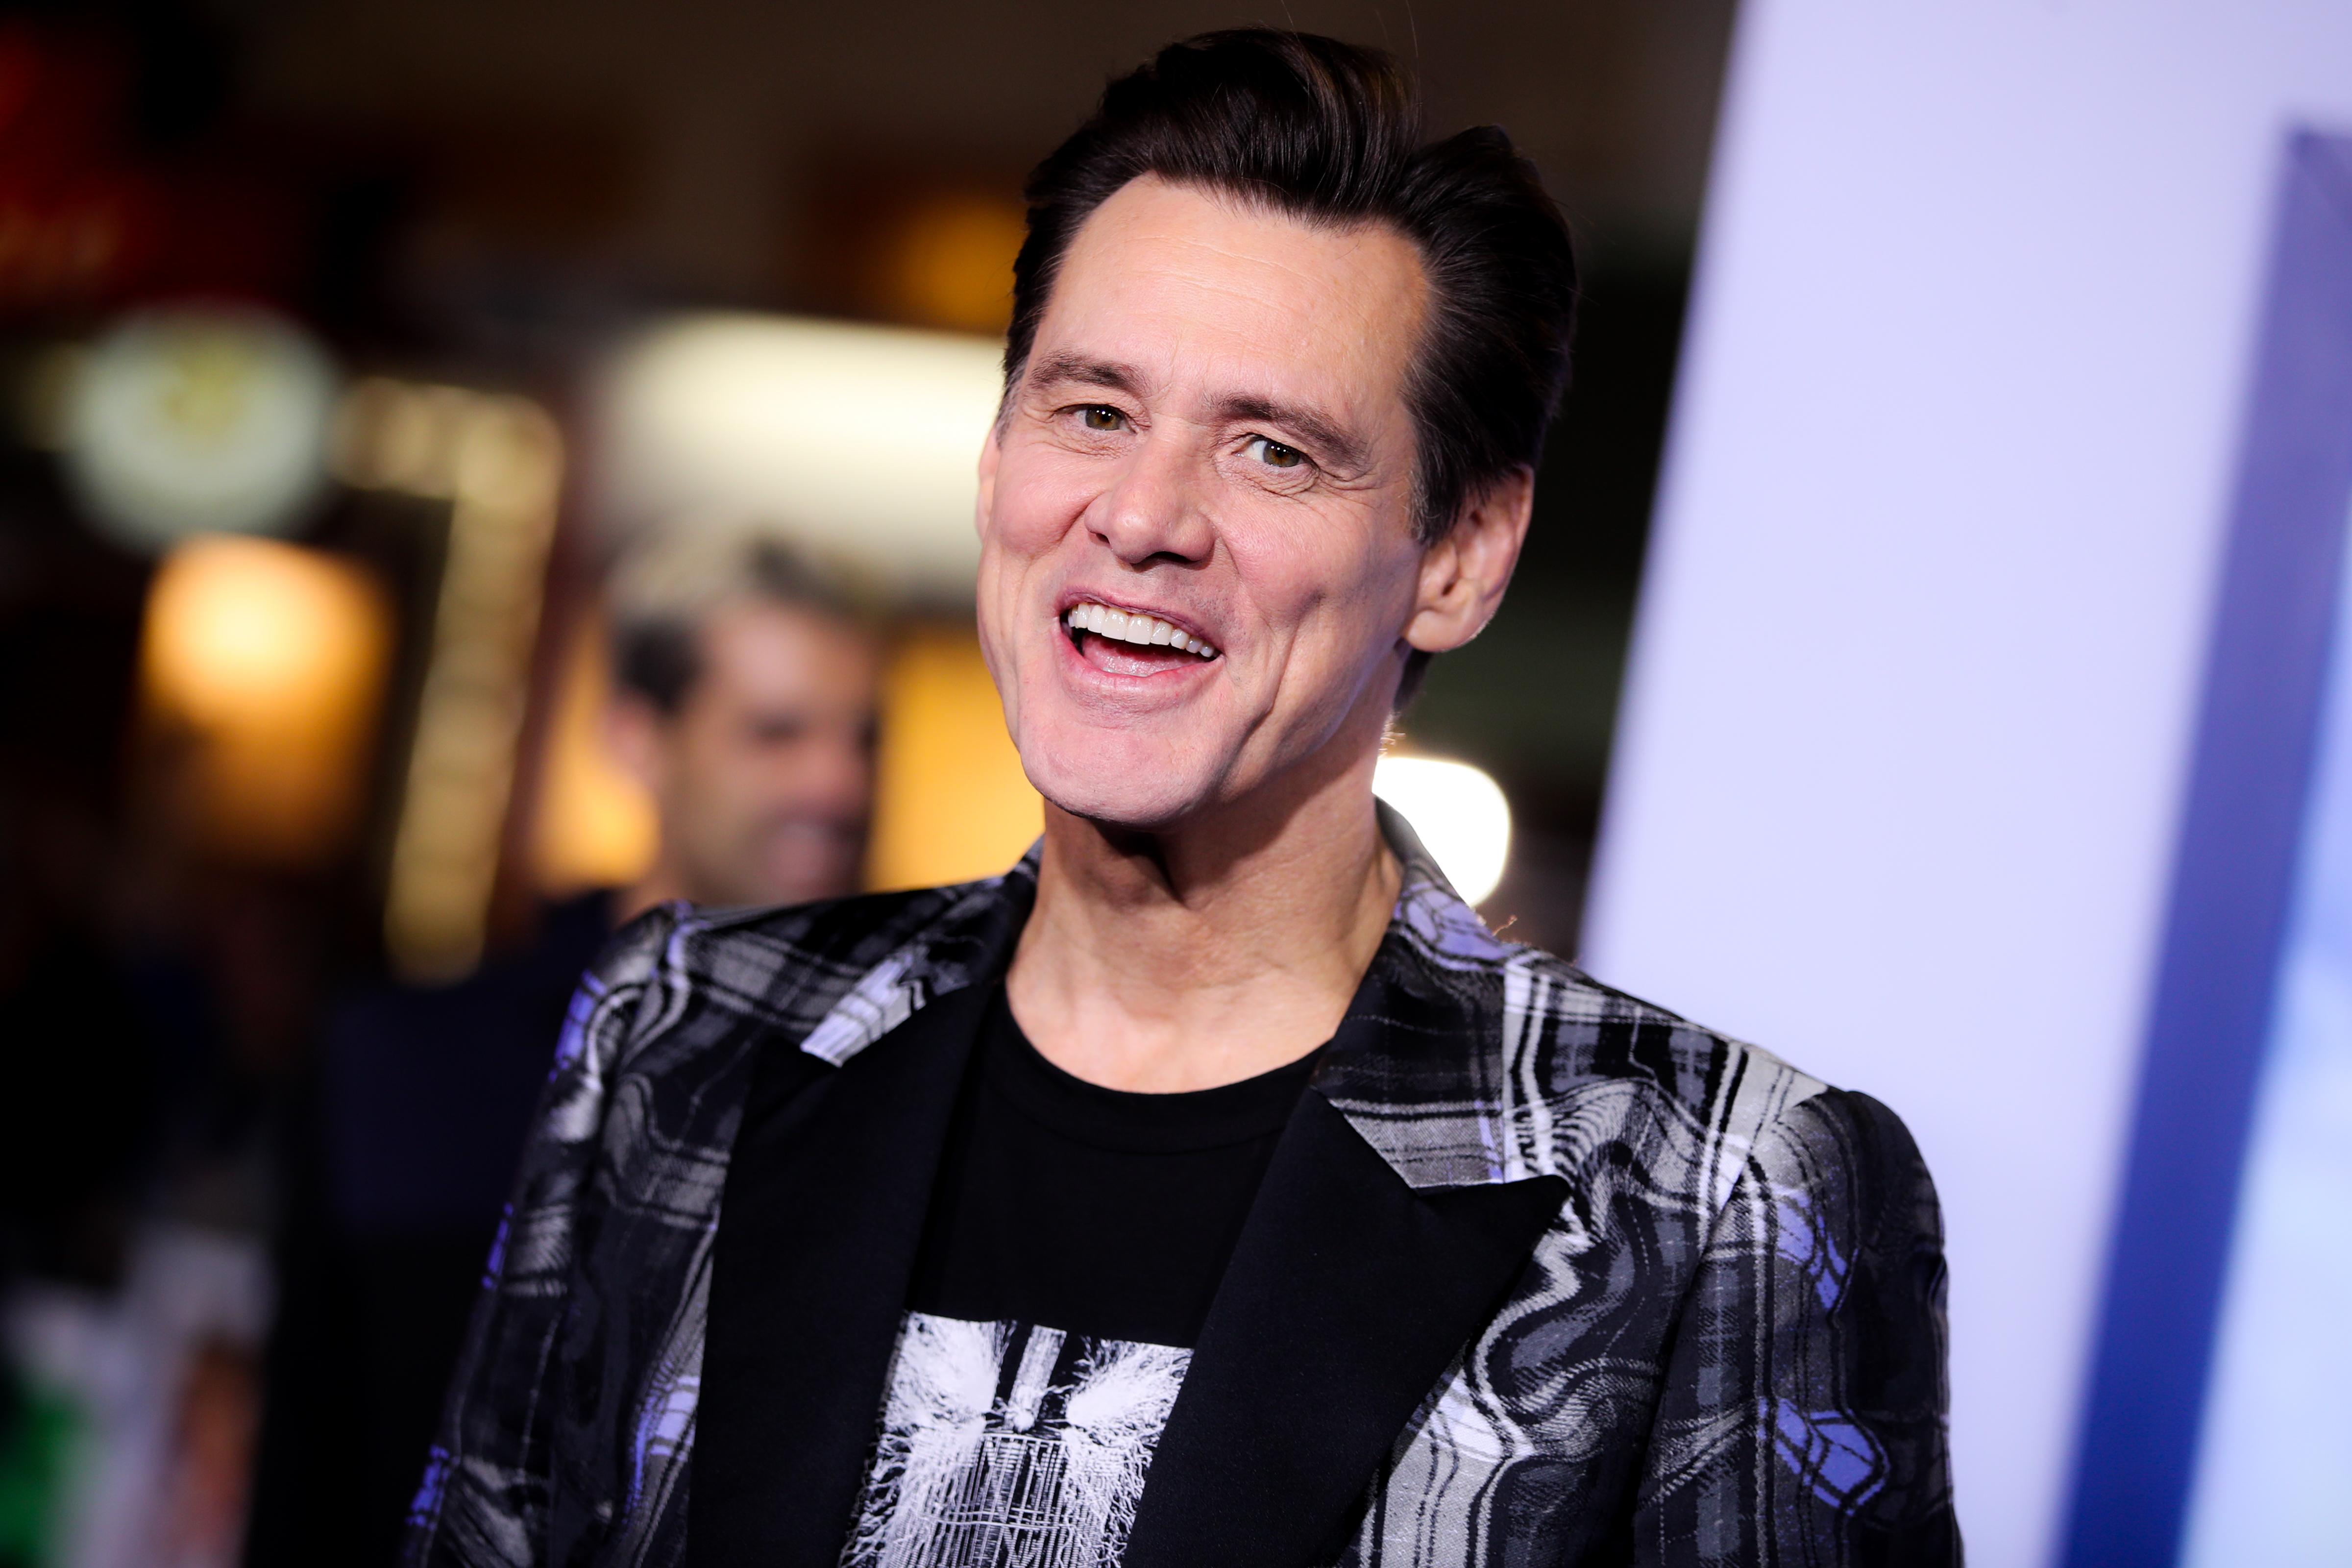 Jim Carrey attends the LA special screening of "Sonic The Hedgehog" at Regency Village Theatre on February 12, 2020 in Westwood, California | Source: Getty Images